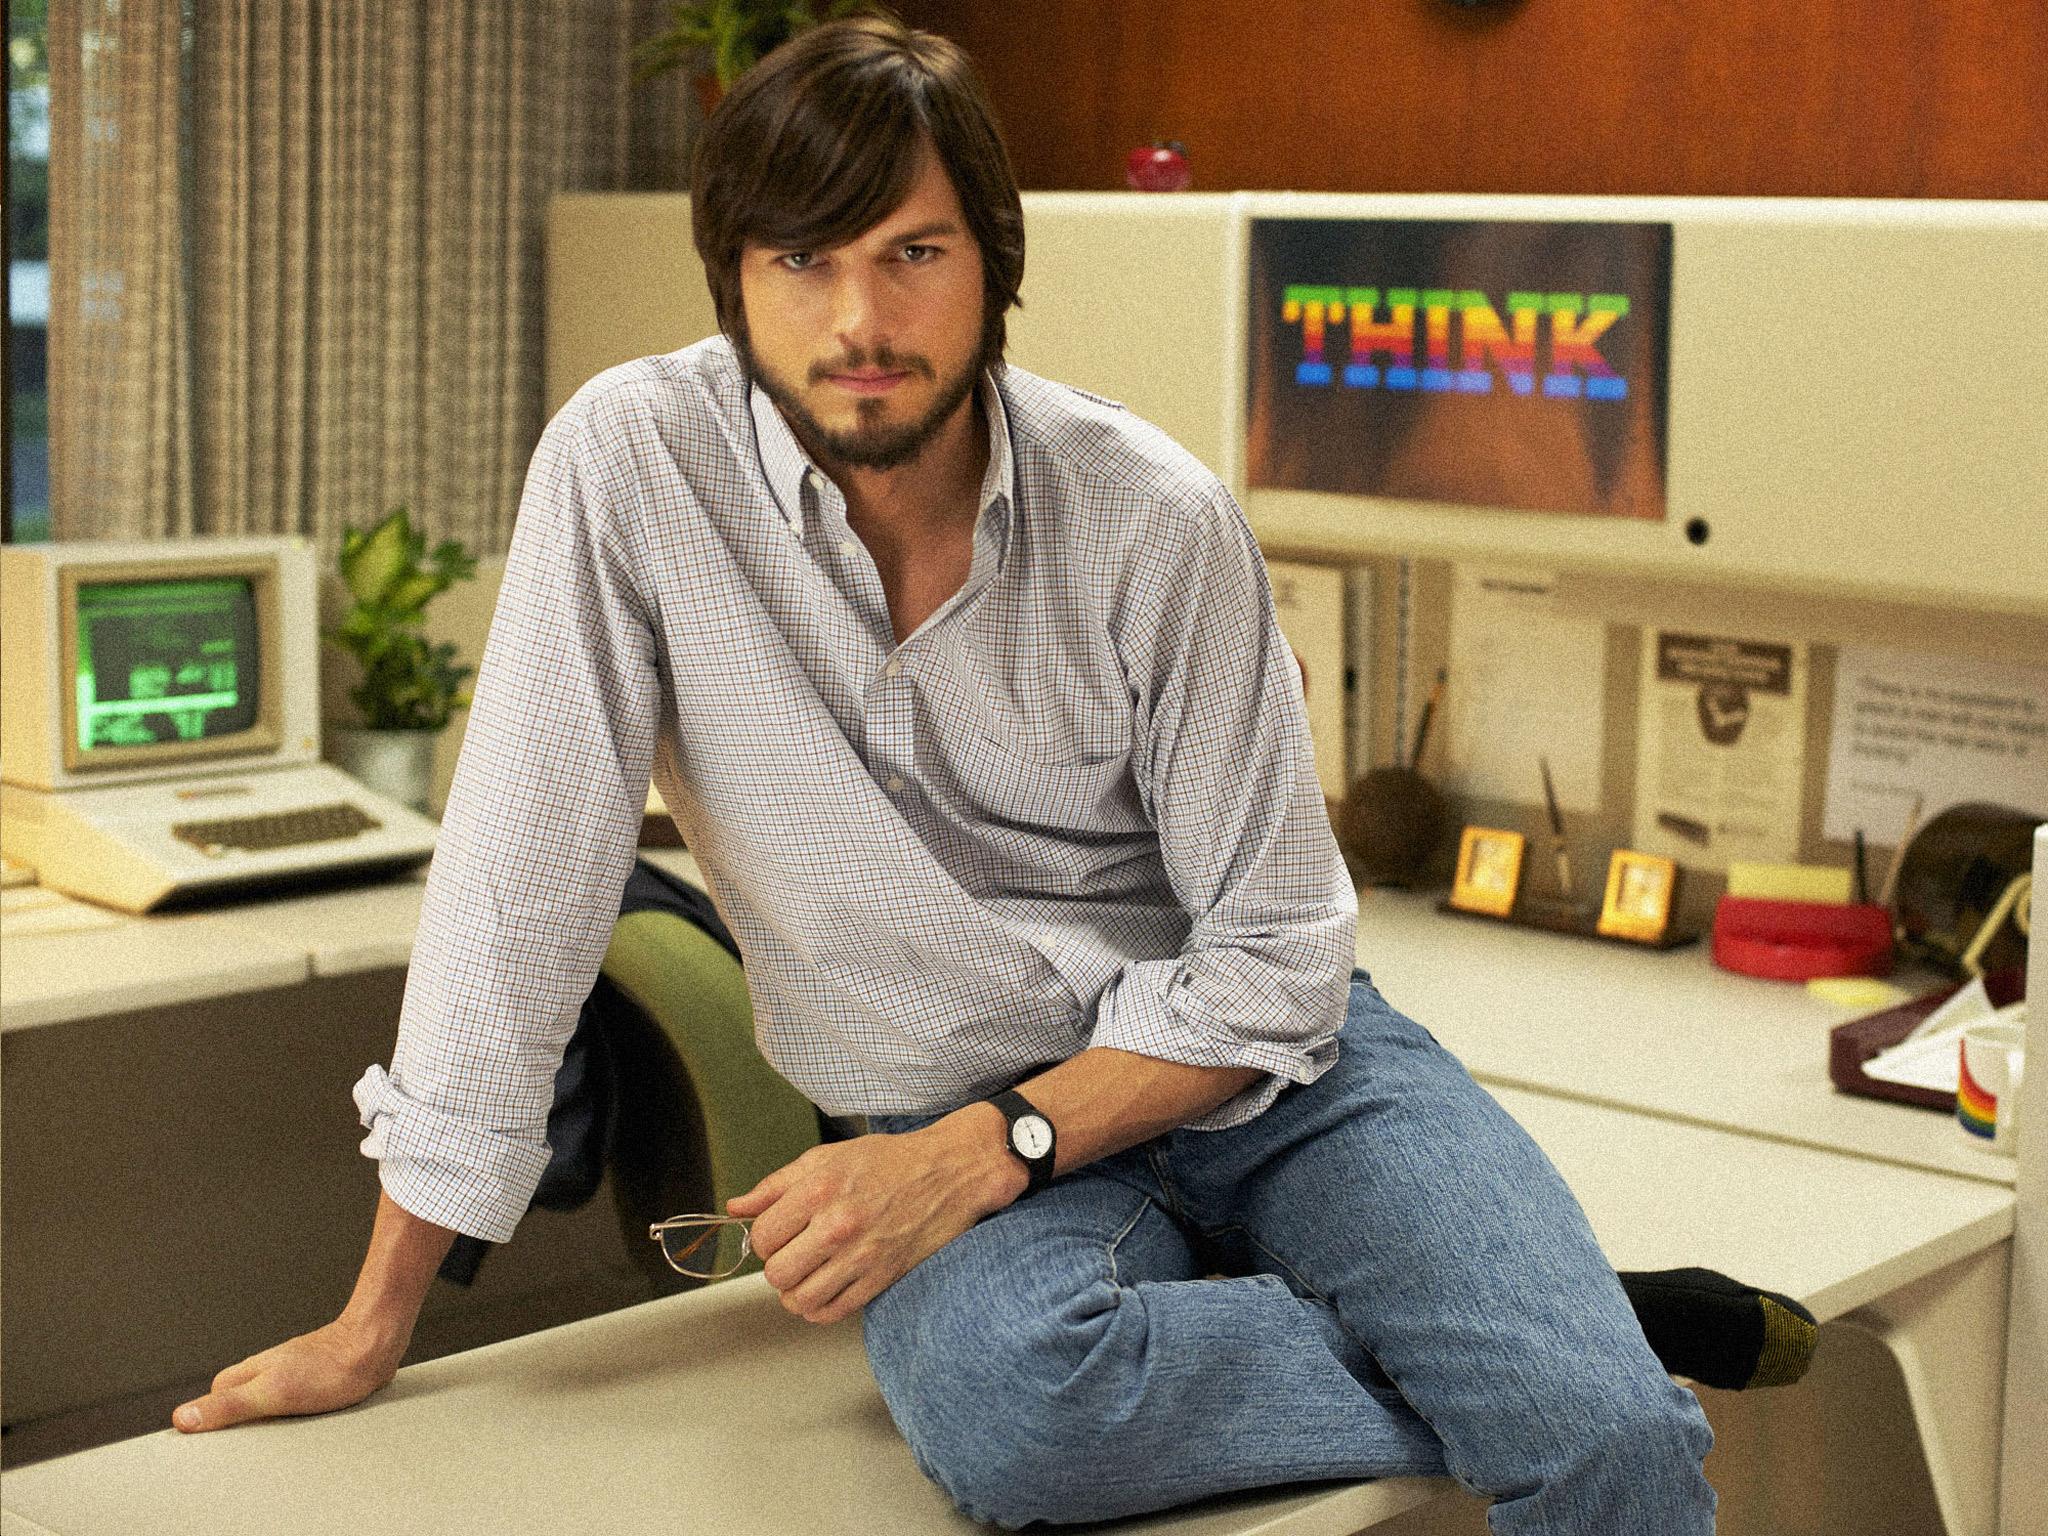 Ashton Kutcher as Steve Jobs in the forthcoming biopic about the Apple boss